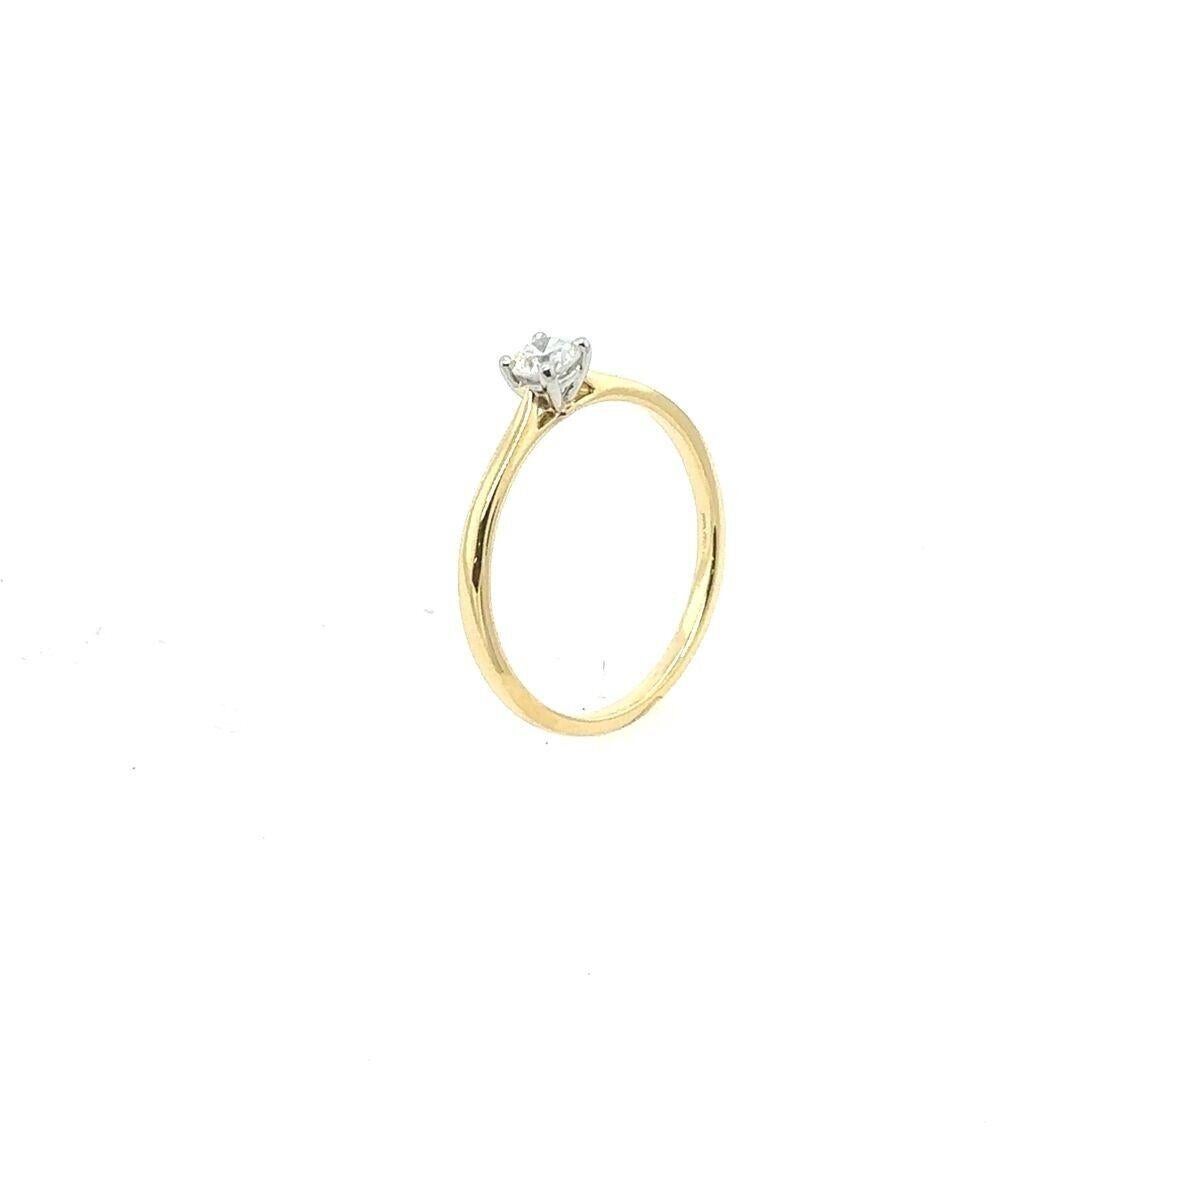 This 18ct yellow gold and platinum solitaire diamond ring is set with a 0.25ct round brilliant cut diamond. Set in 18ct yellow gold and platinum setting. The ring is a perfect symbol of your commitment to love.

Additional Information:
Total Diamond